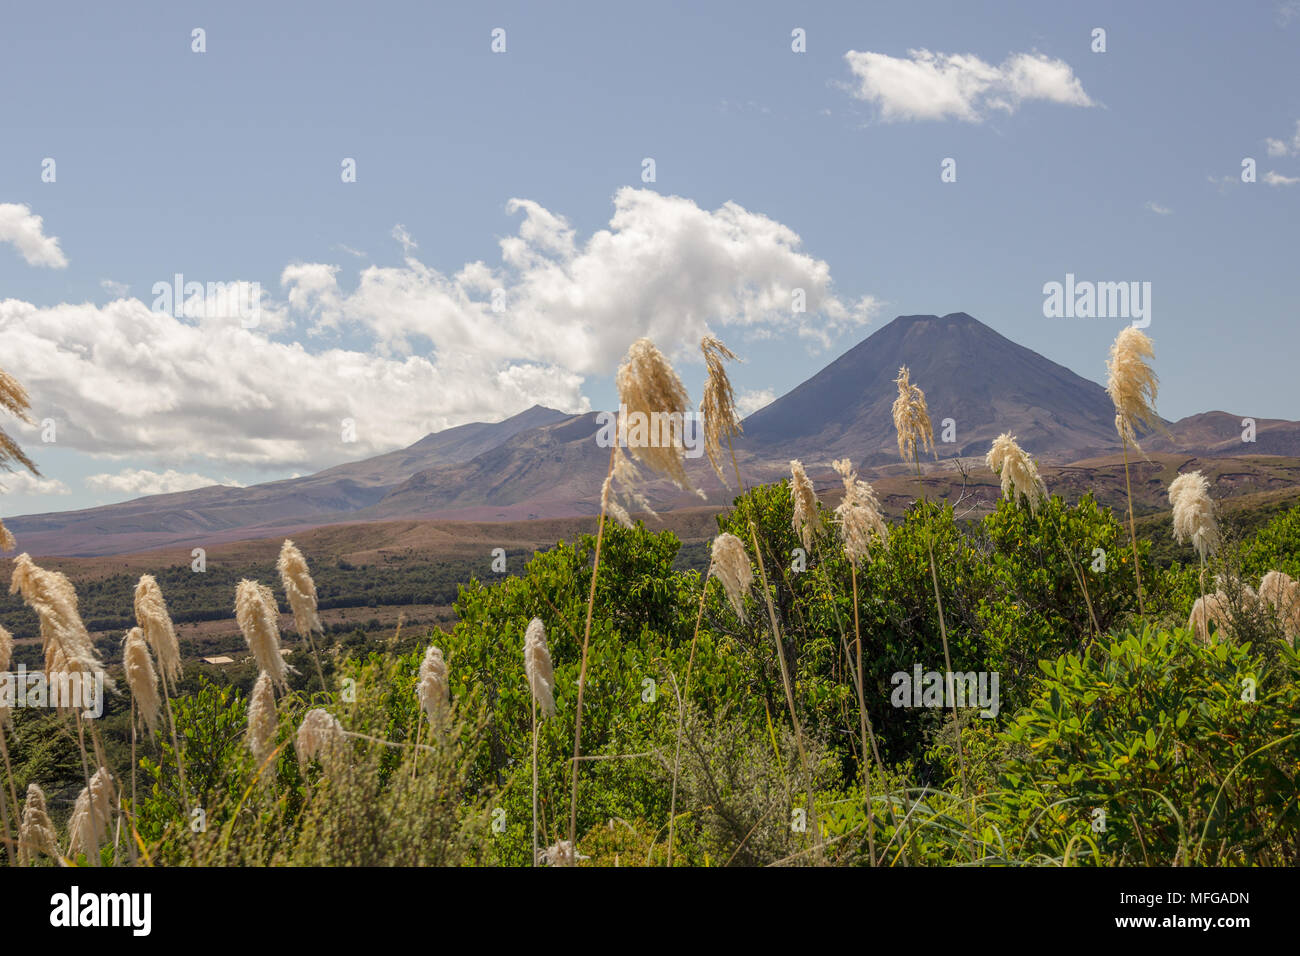 Tall, tufted, white grasses - blurred with wind movement -provide foreground for Tongariro Volcano and plateau, Tongariro National Park, New Zealand Stock Photo